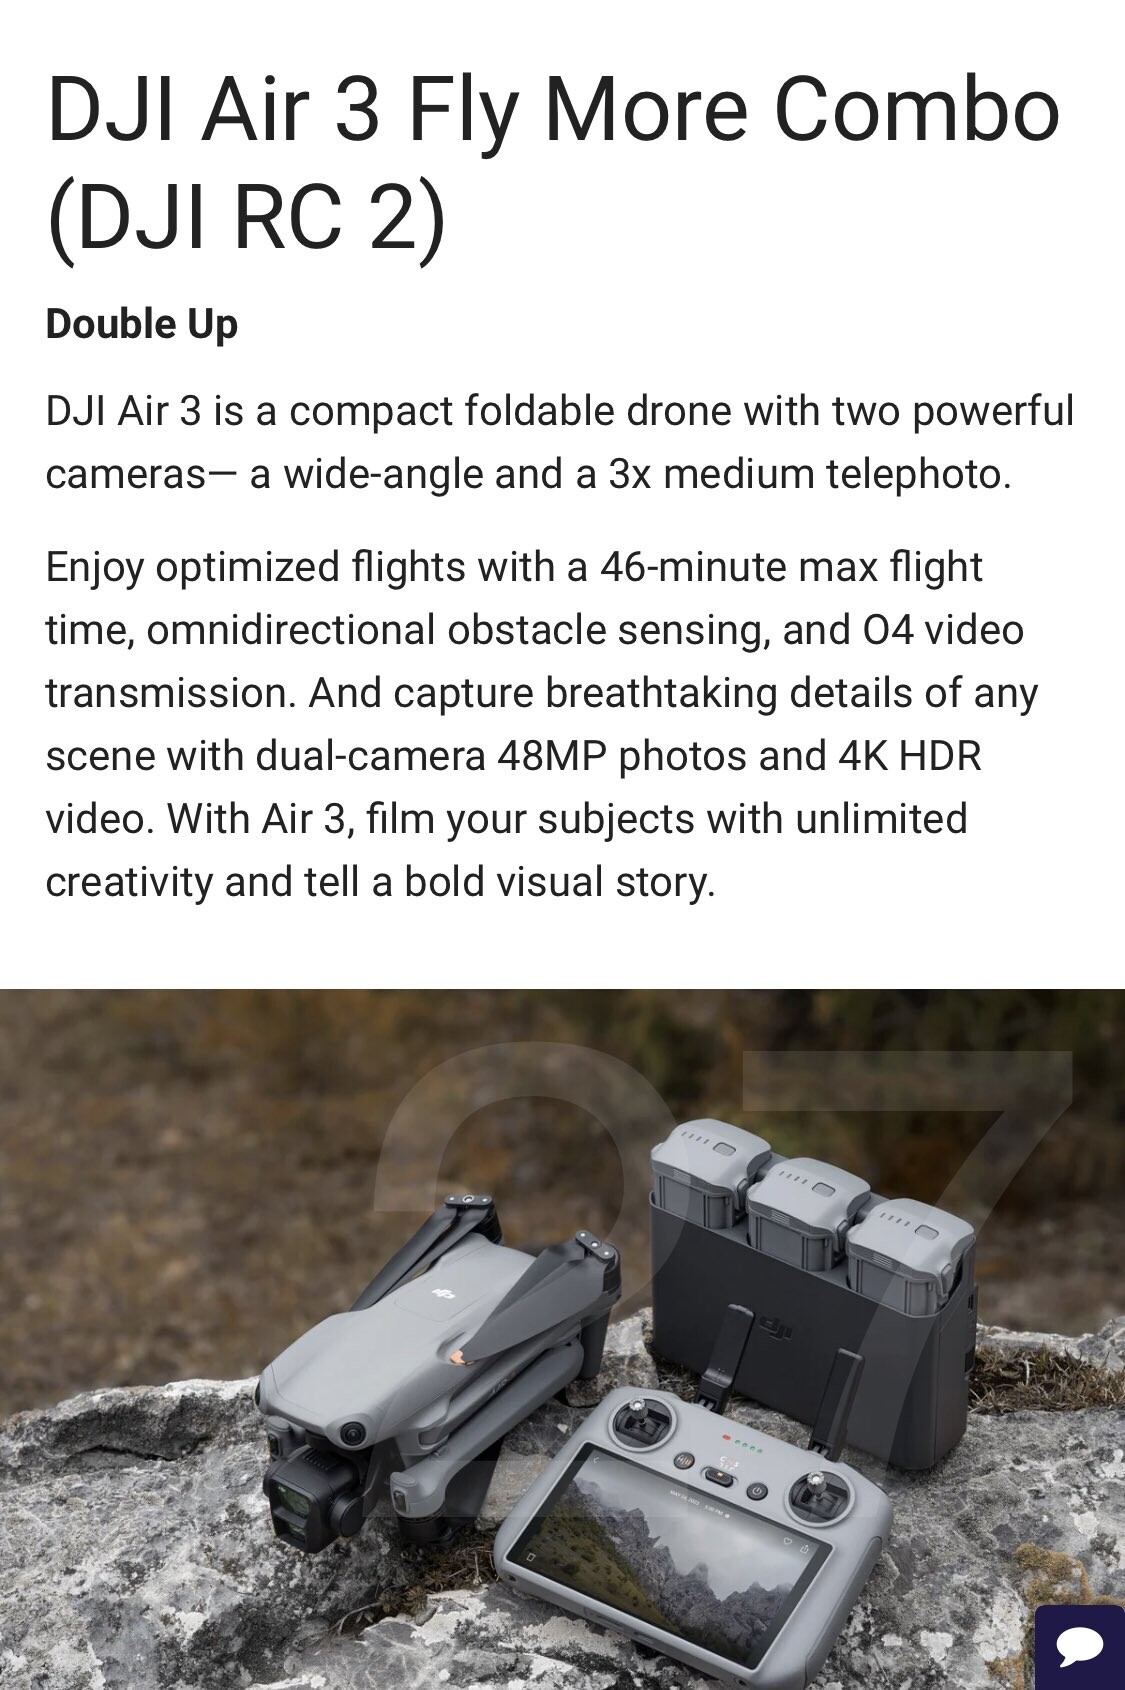 DJI Air 3: Camera specifications surface in several new leaks